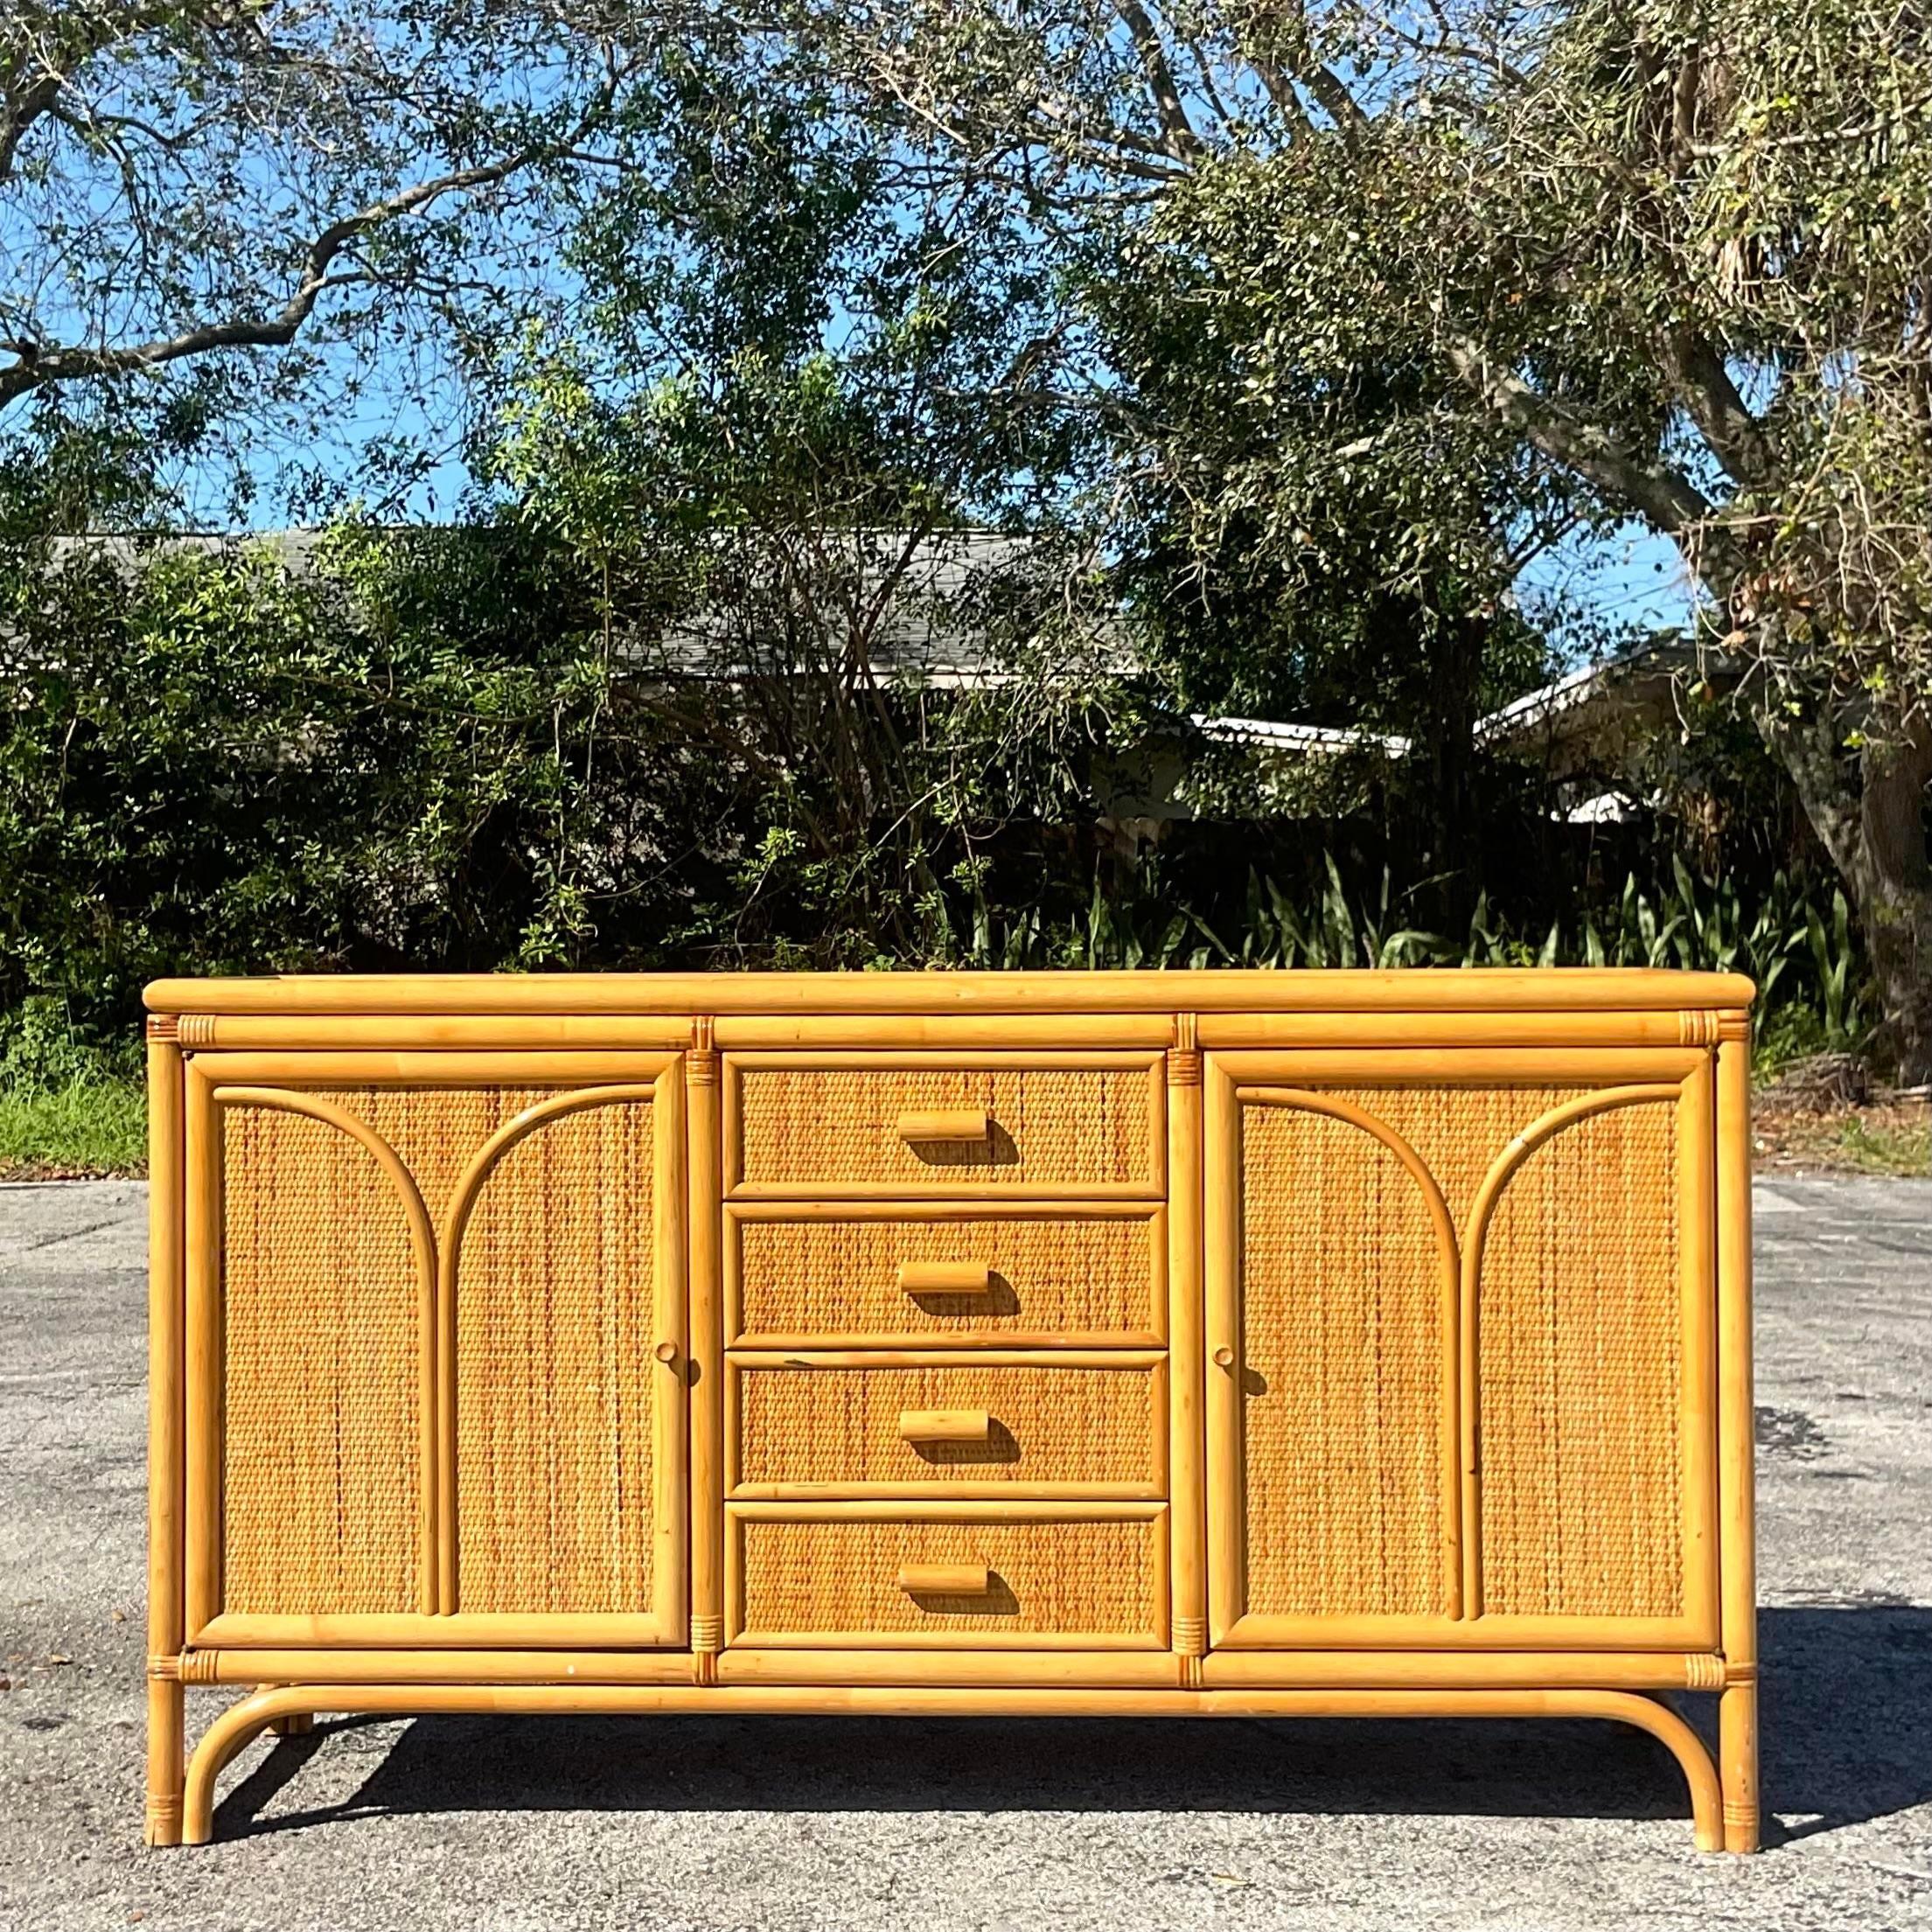 Vintage Coastal woven rattan credenza. A chic two door design with arched rattan and woven rattan inset panels. Lots of great storage below. Acquired from a Palm Beach estate.